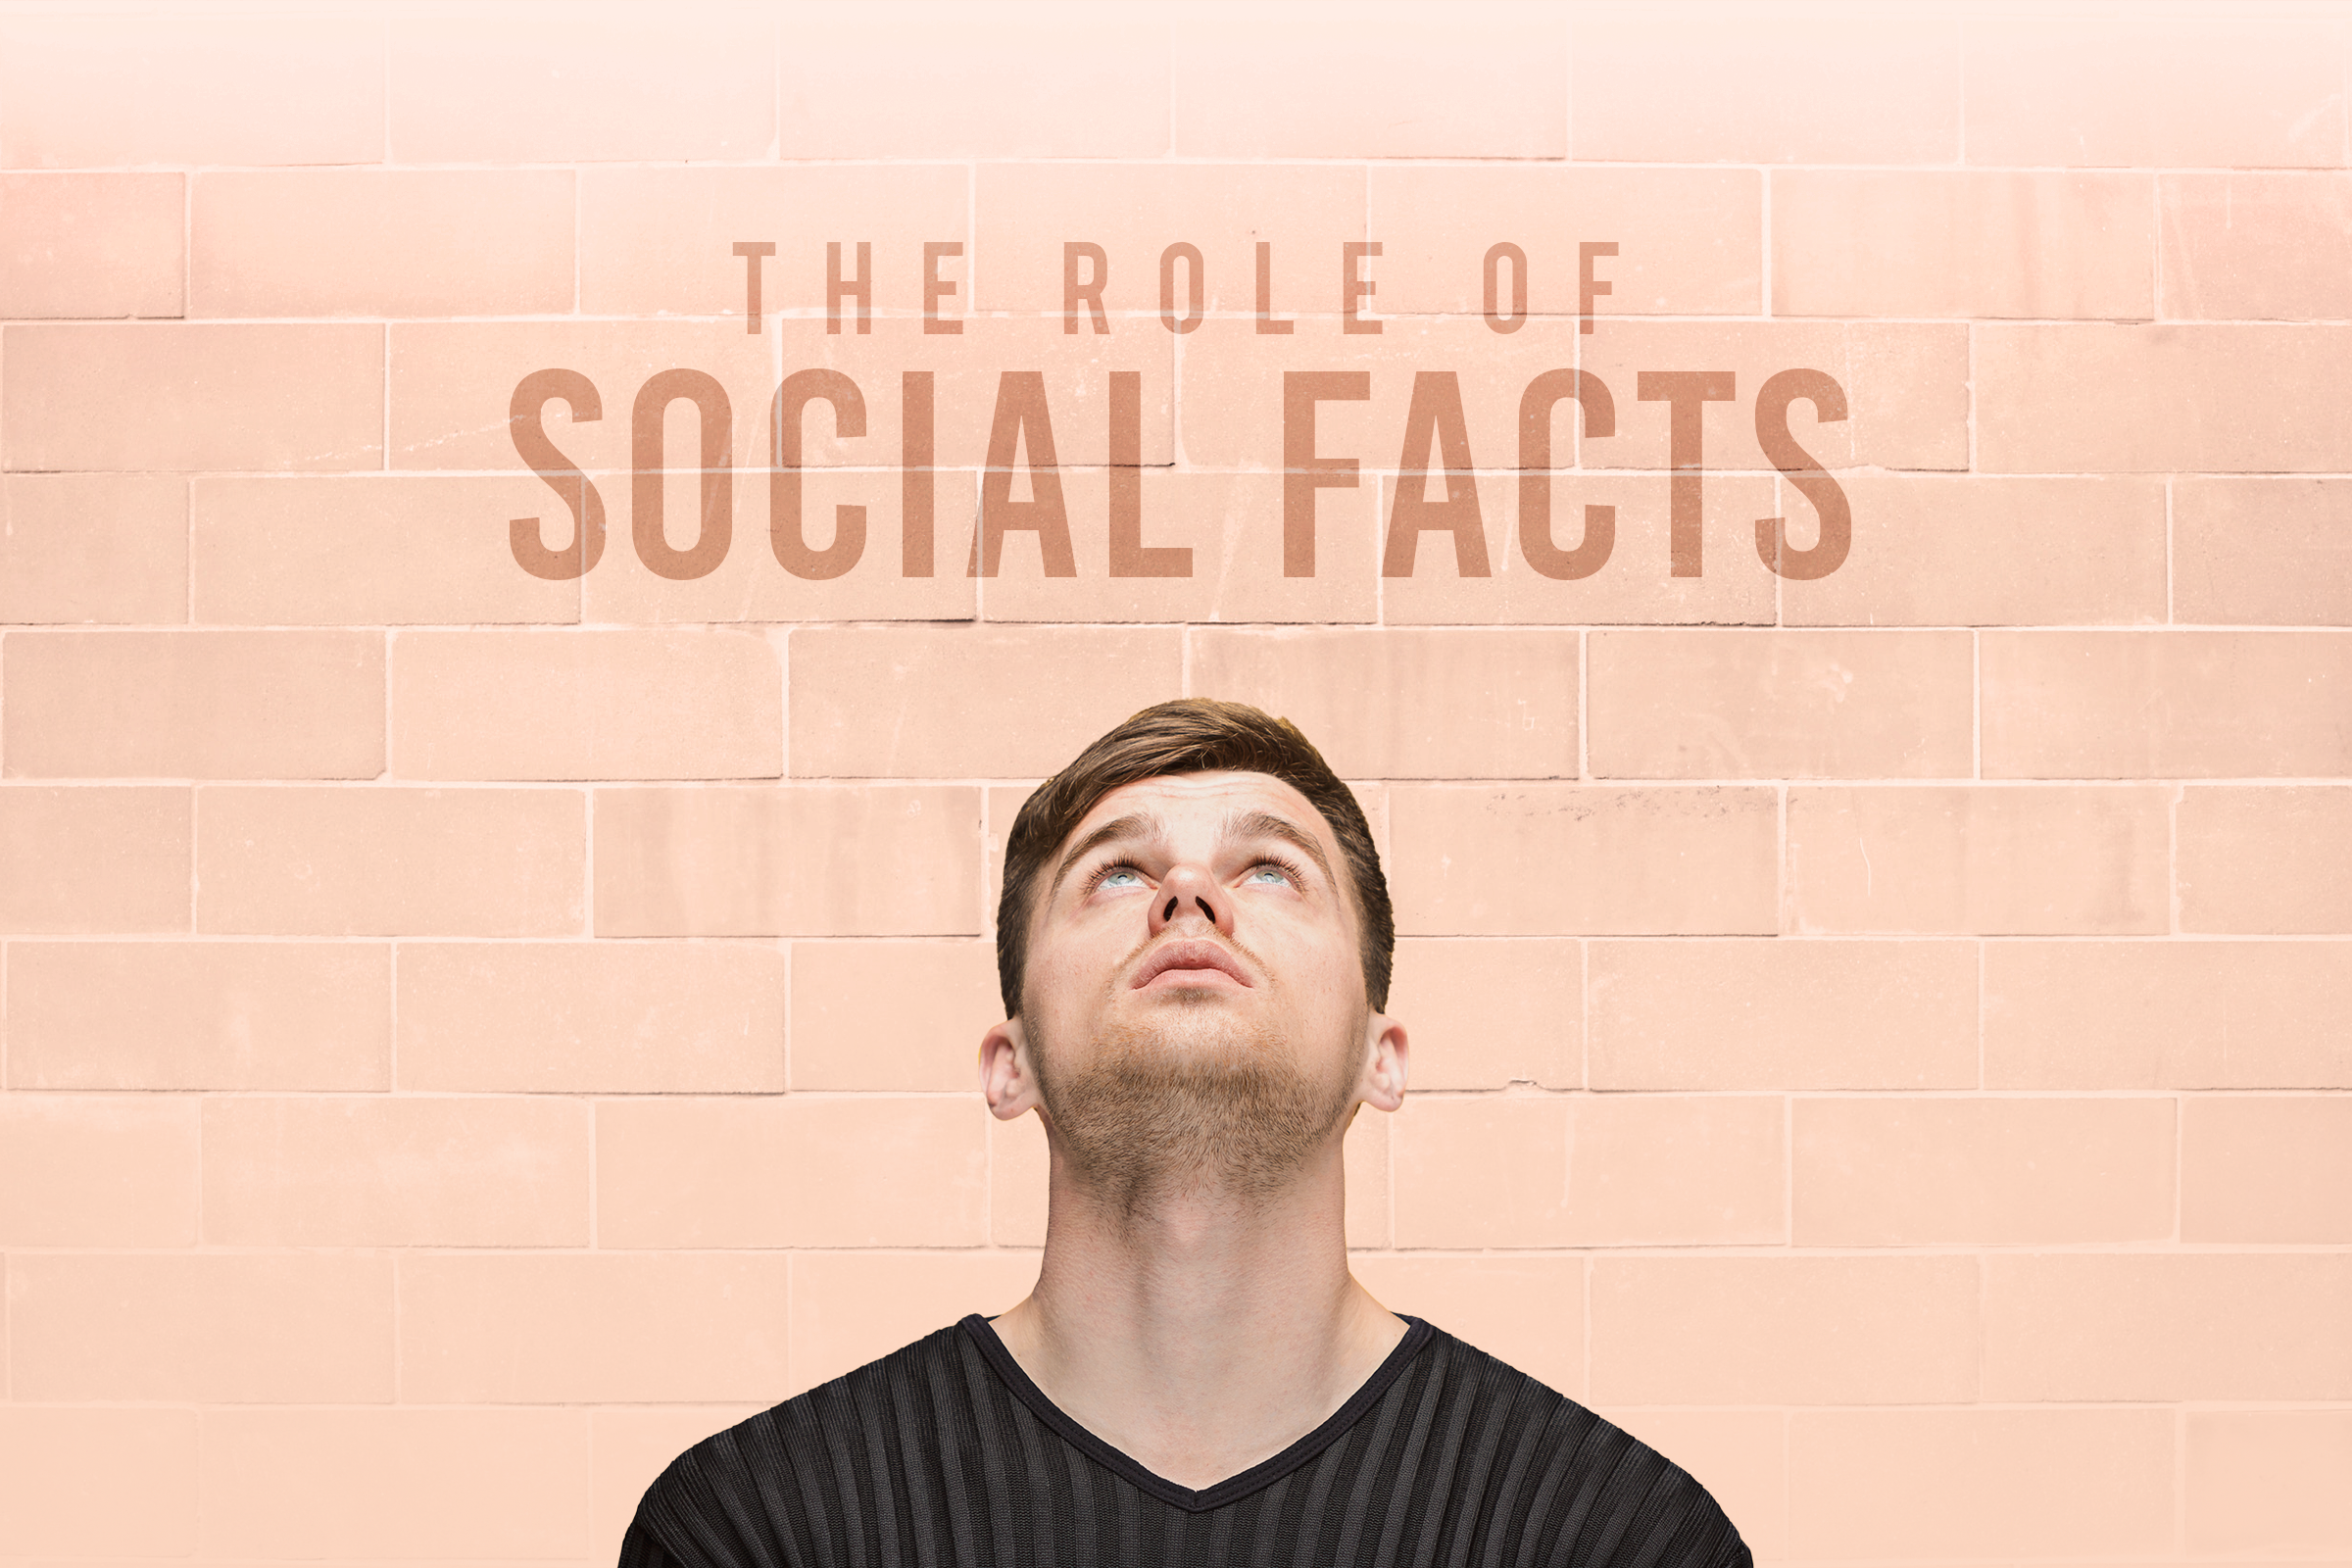 The Role of Social Facts